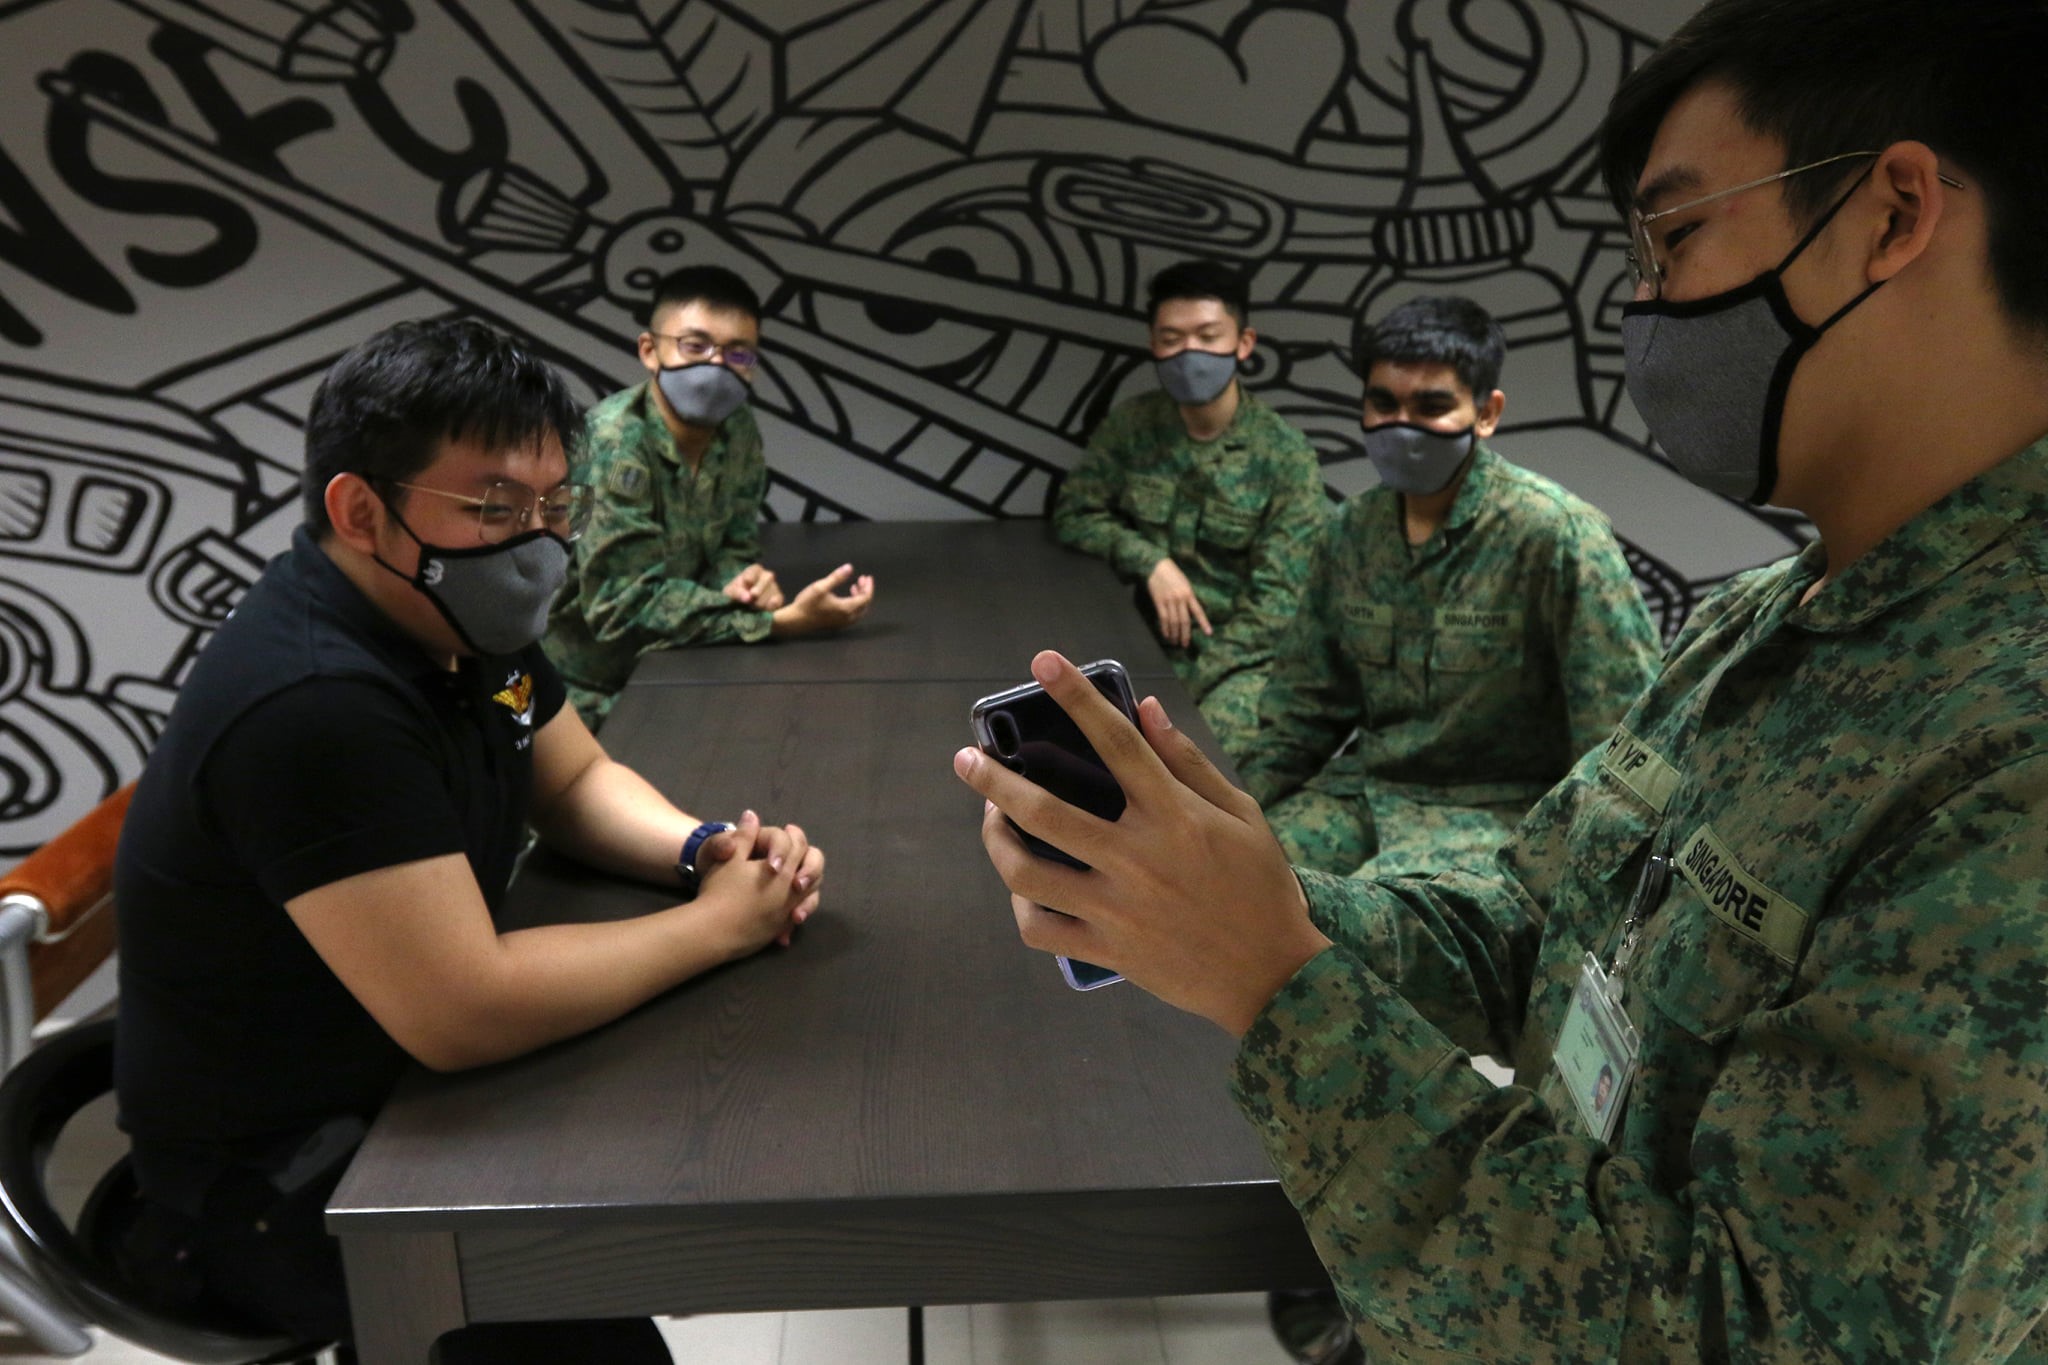 PTE Sim (bottom left) and his team having a discussion on how to further improve the IPPT application.